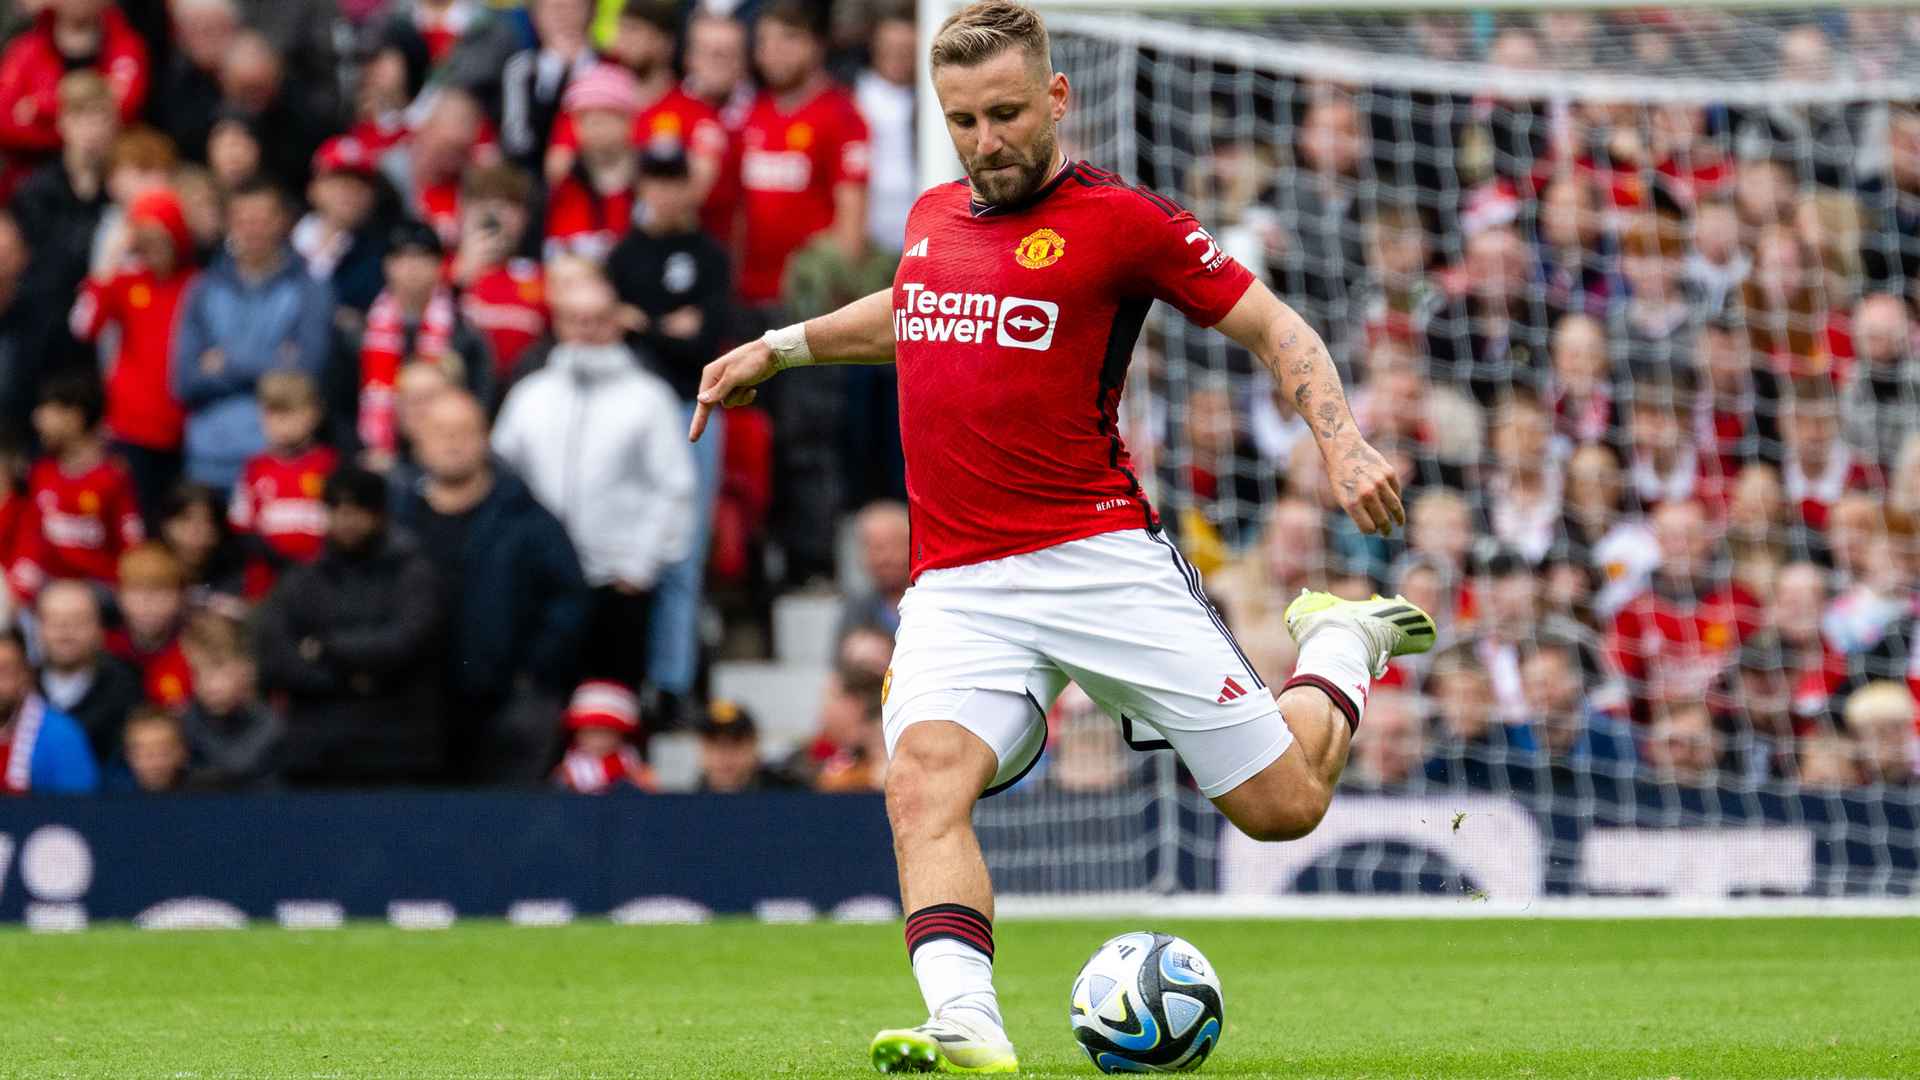 Luke Shaw is aiming high with Manchester United ahead of 202324 season 12 Aug 23 | Manchester United